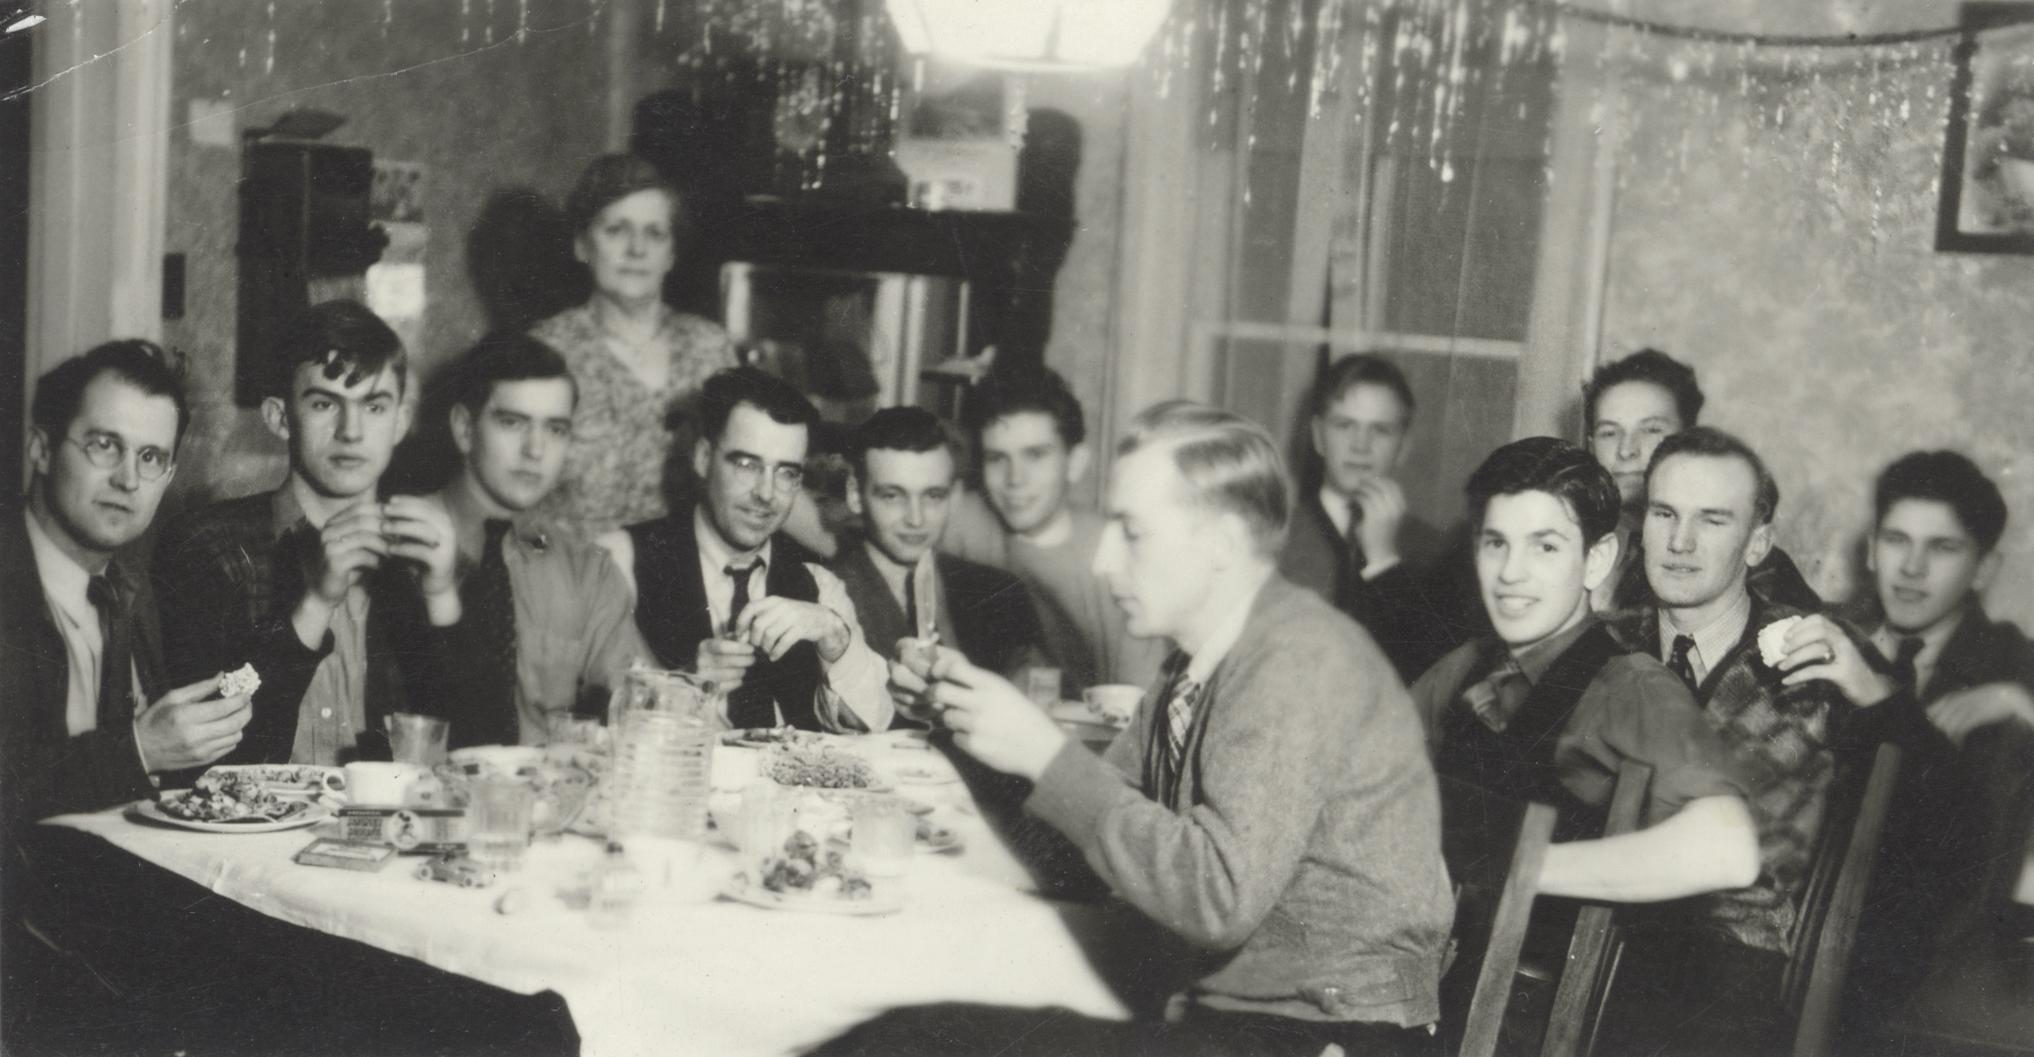 Boarding house Christmas party, 1937